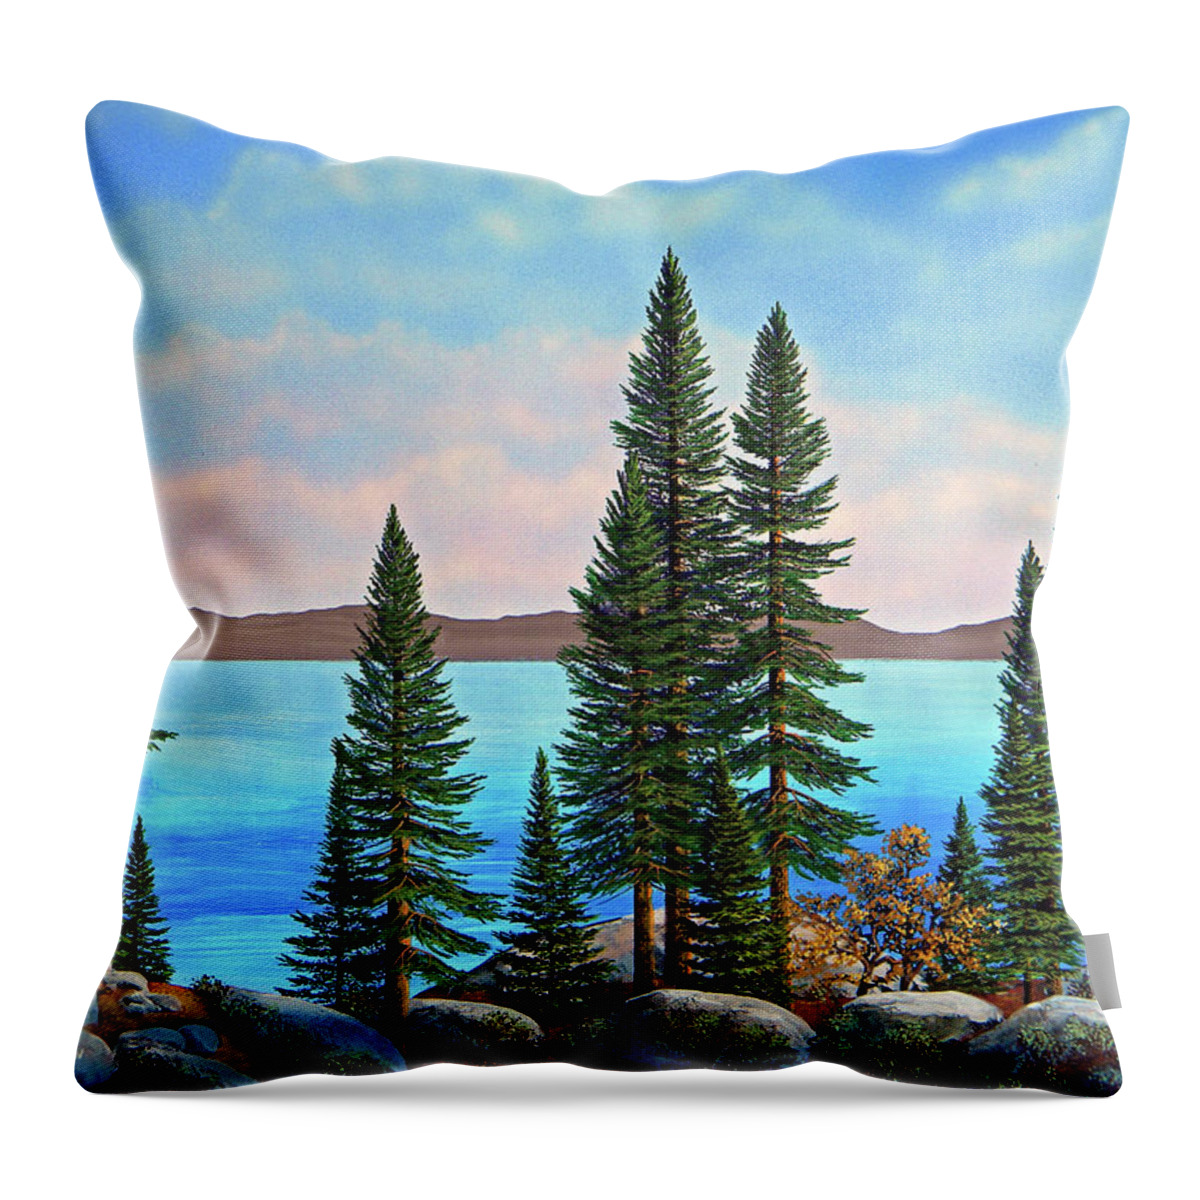 Tahoe Shore Throw Pillow featuring the painting Tahoe Shore by Frank Wilson